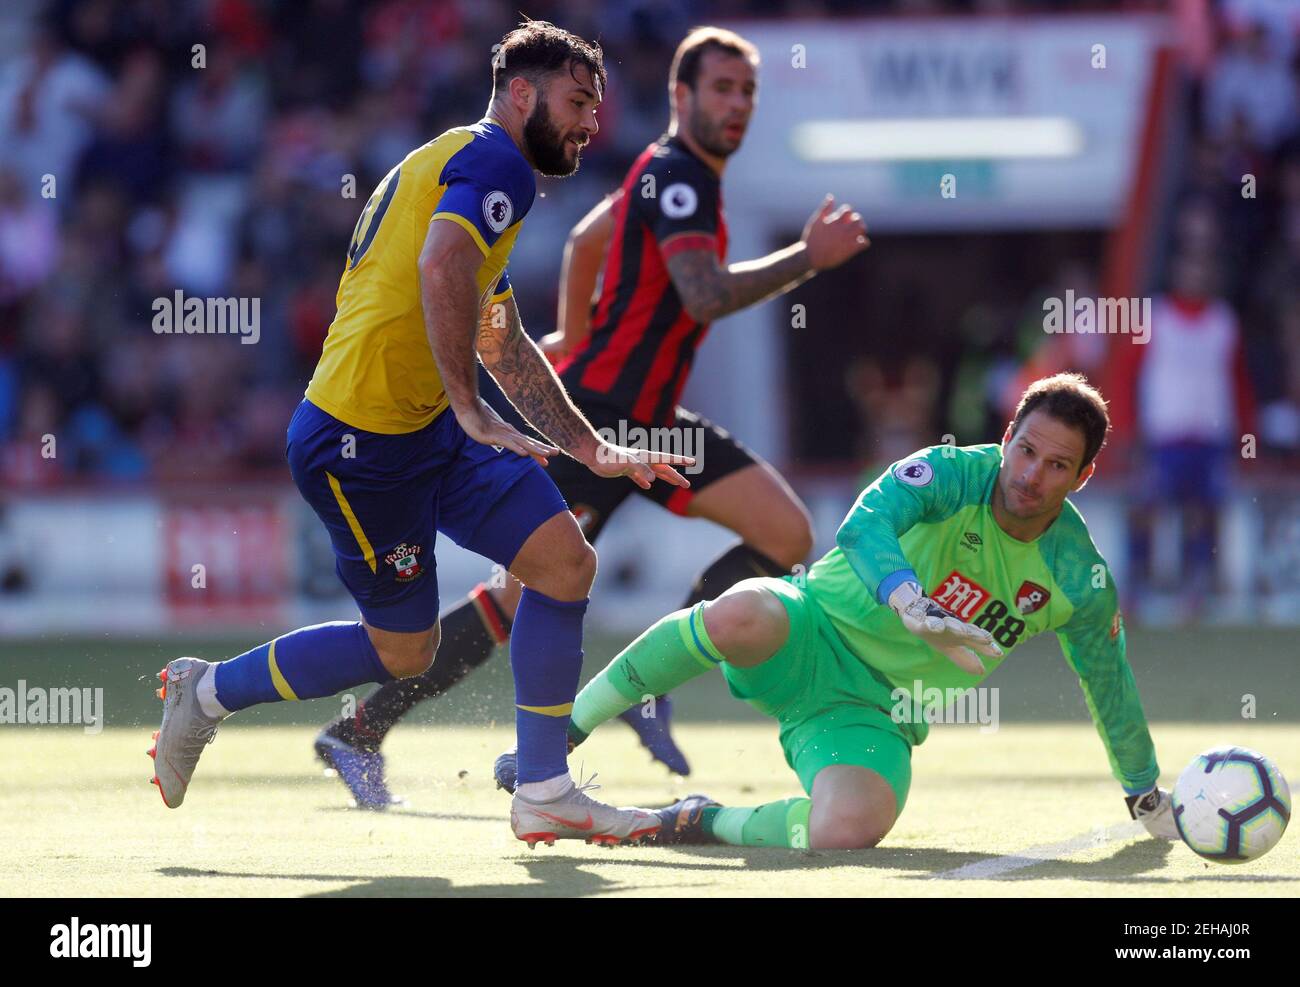 Soccer Football - Premier League - AFC Bournemouth v Southampton - Vitality Stadium, Bournemouth, Britain - October 20, 2018  Southampton's Charlie Austin in action with Bournemouth's Asmir Begovic   REUTERS/Eddie Keogh  EDITORIAL USE ONLY. No use with unauthorized audio, video, data, fixture lists, club/league logos or 'live' services. Online in-match use limited to 75 images, no video emulation. No use in betting, games or single club/league/player publications.  Please contact your account representative for further details. Stock Photo